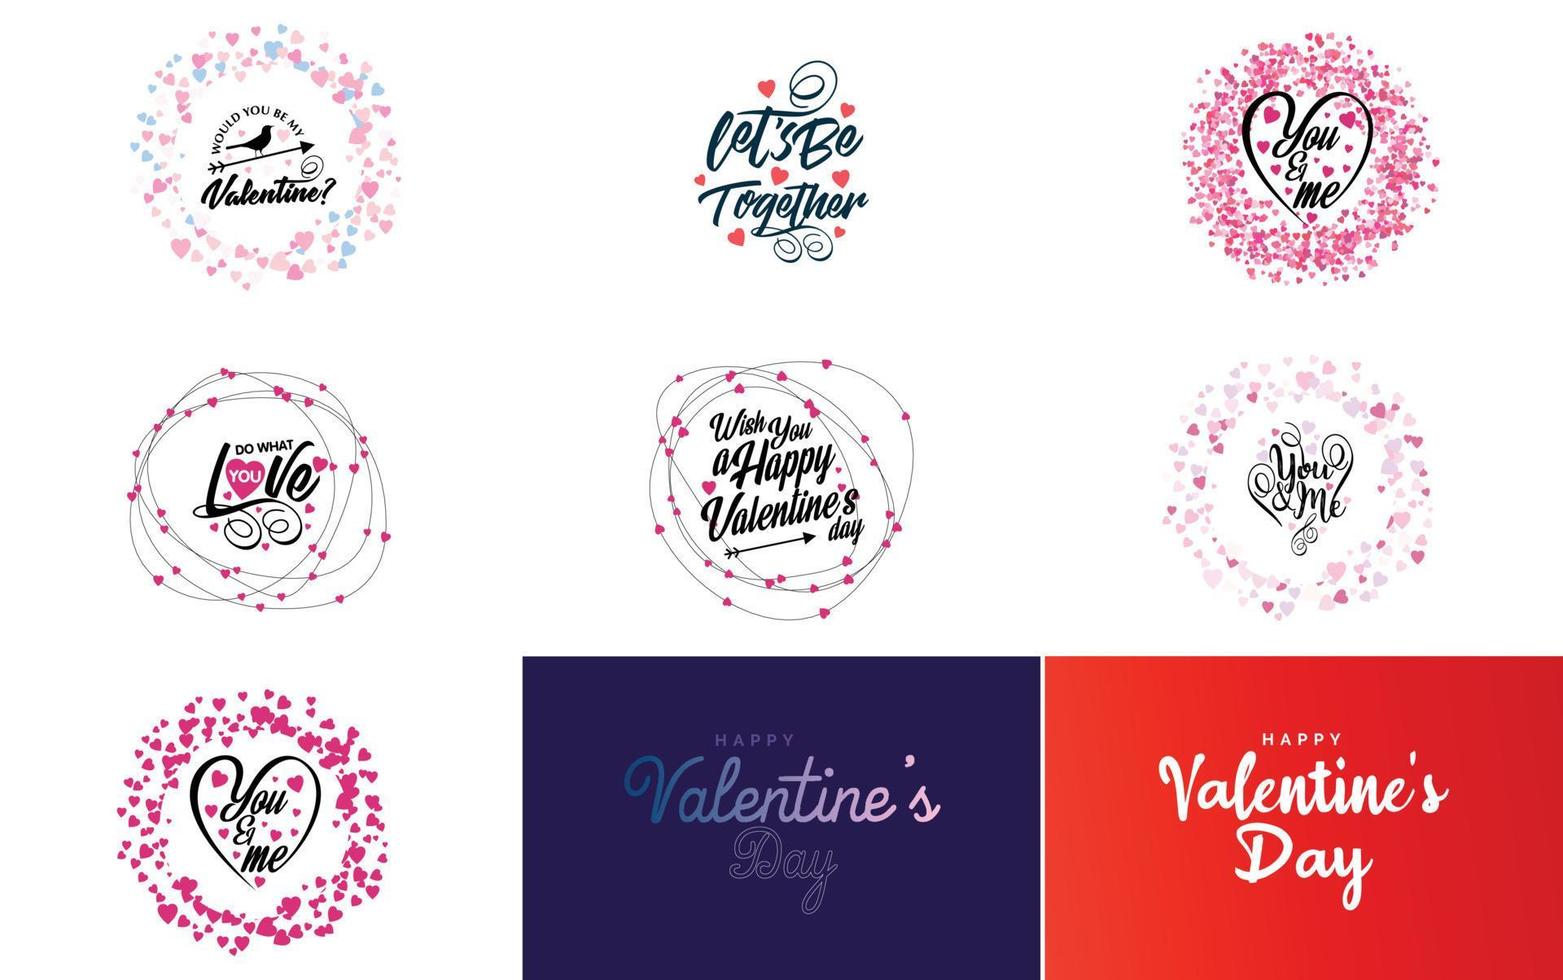 Vector illustration of a heart-shaped wreath with Happy Valentine's Day text